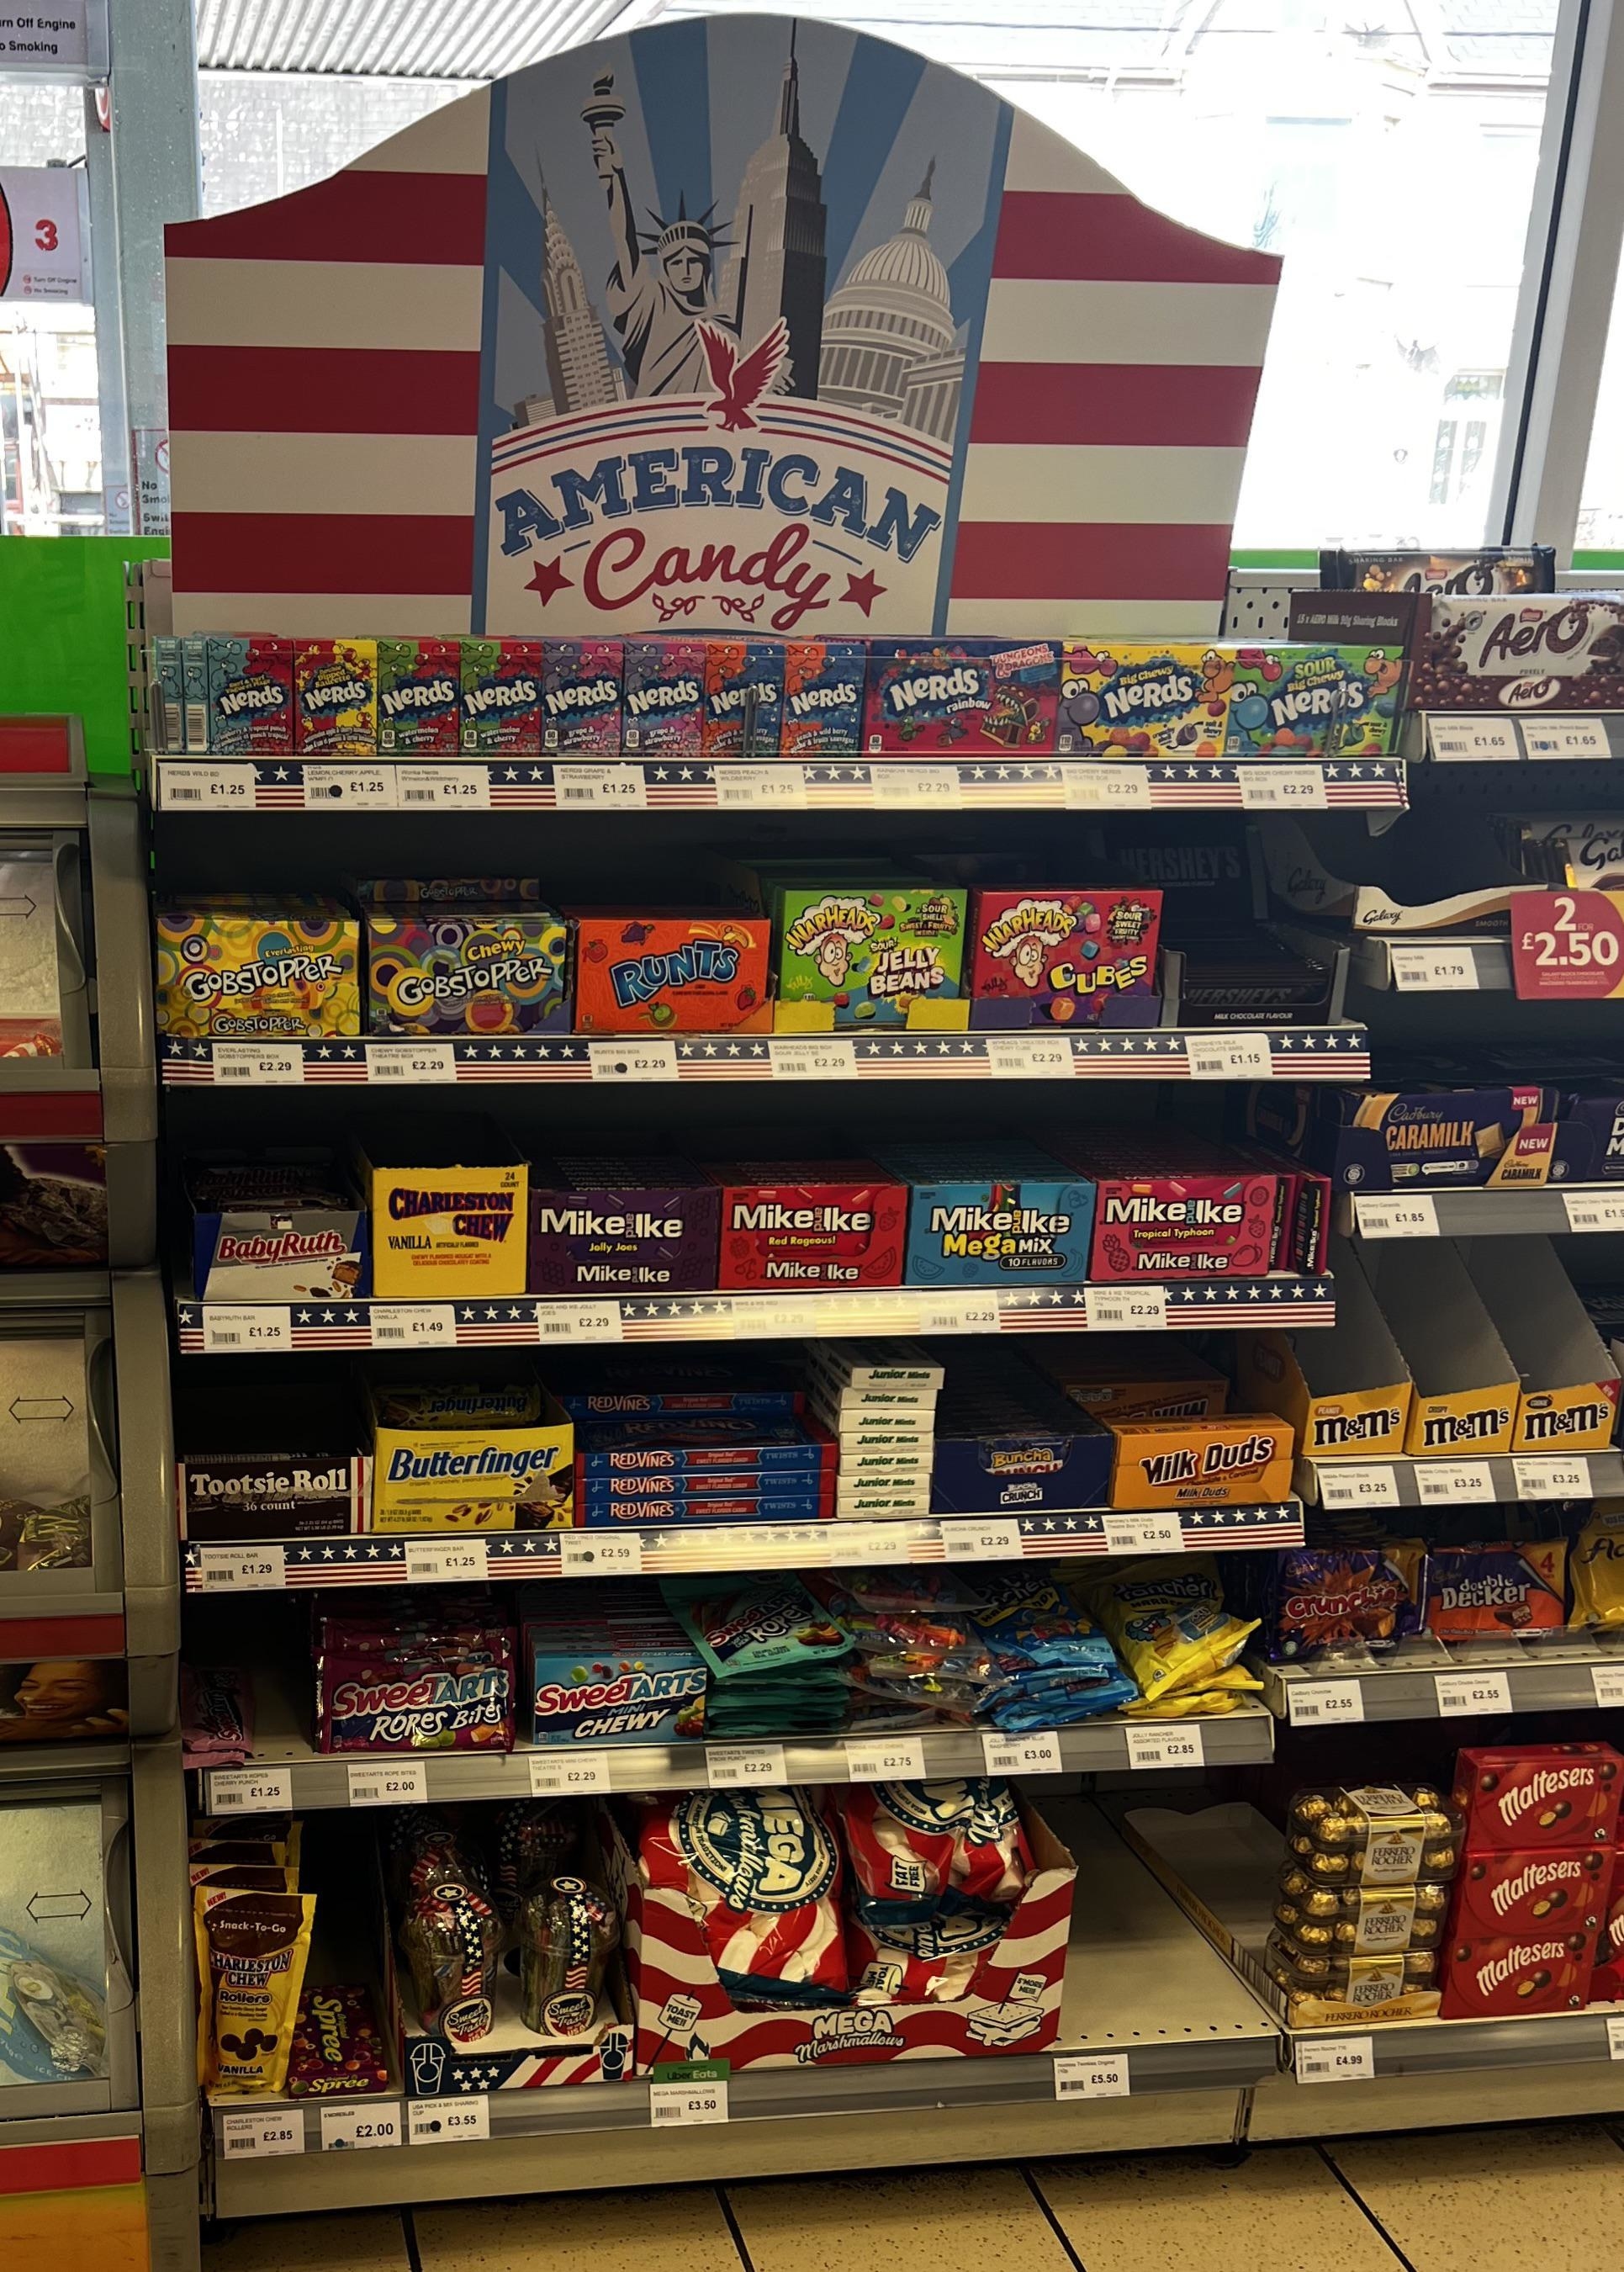 An American candy section in a foreign store